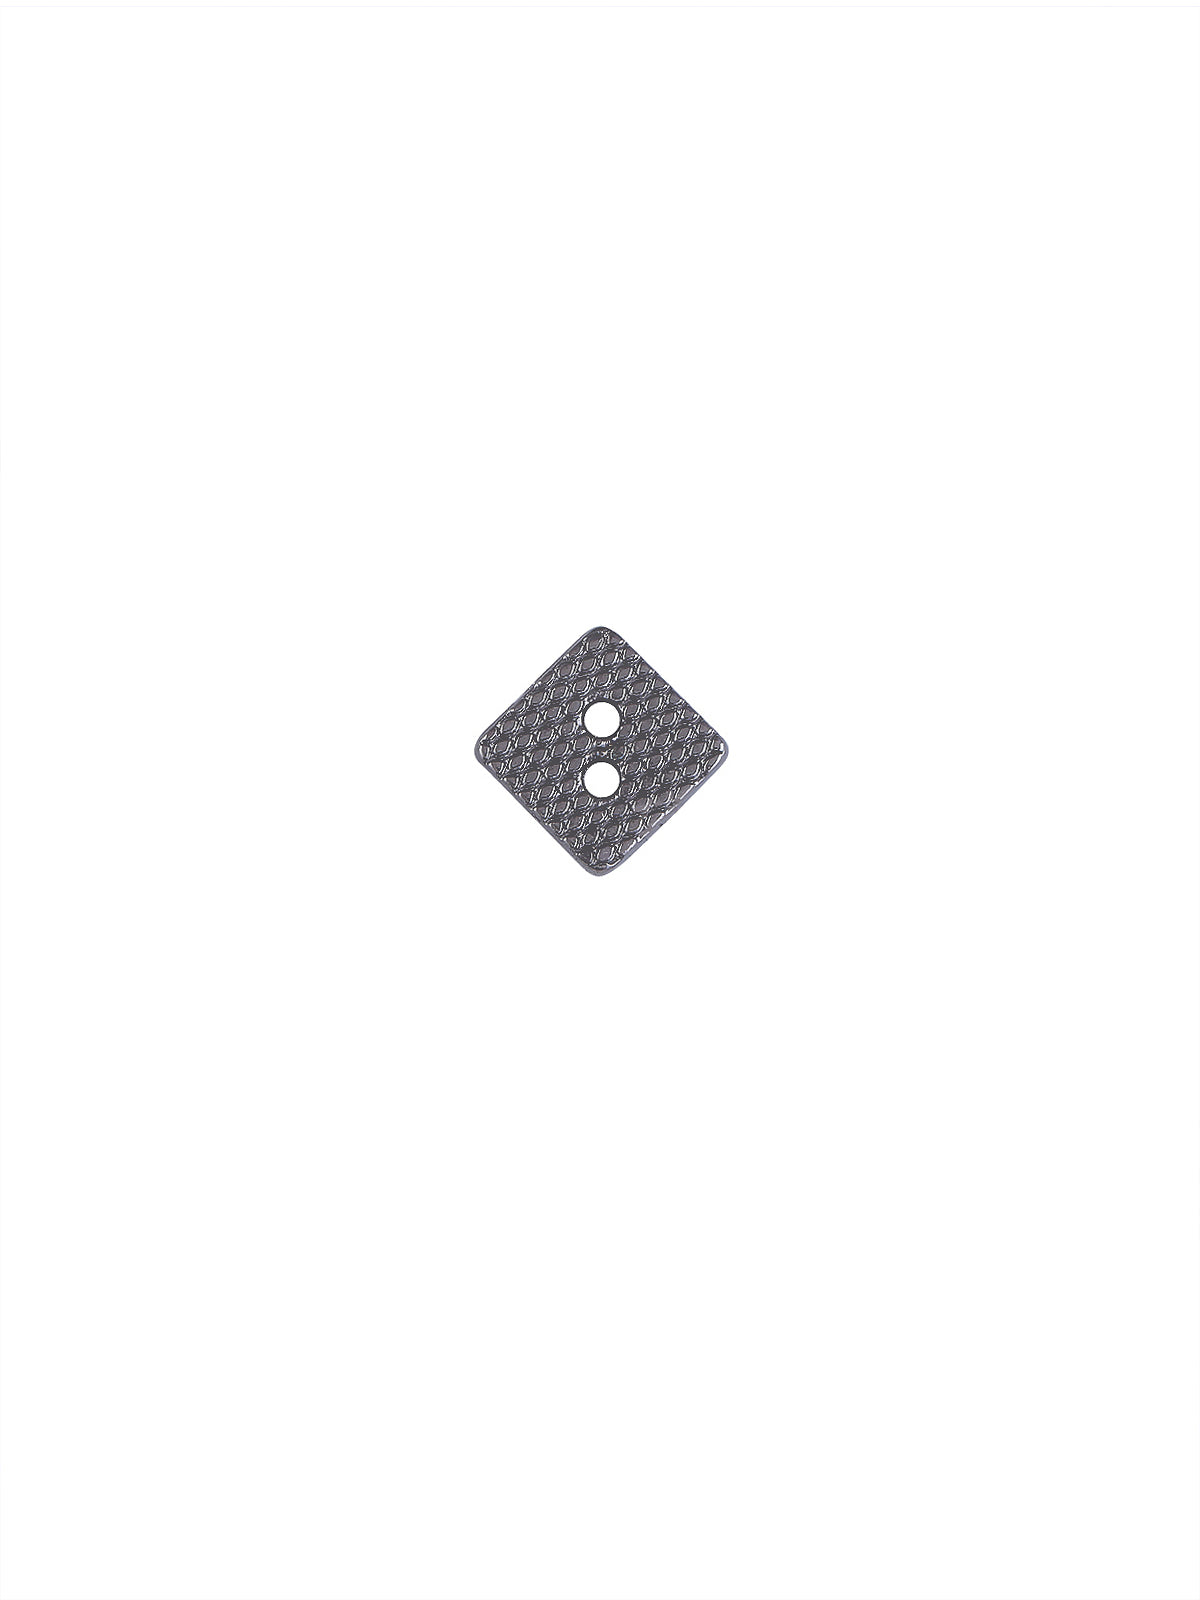 Square Shape Textured Surface 8mm Shirt Button